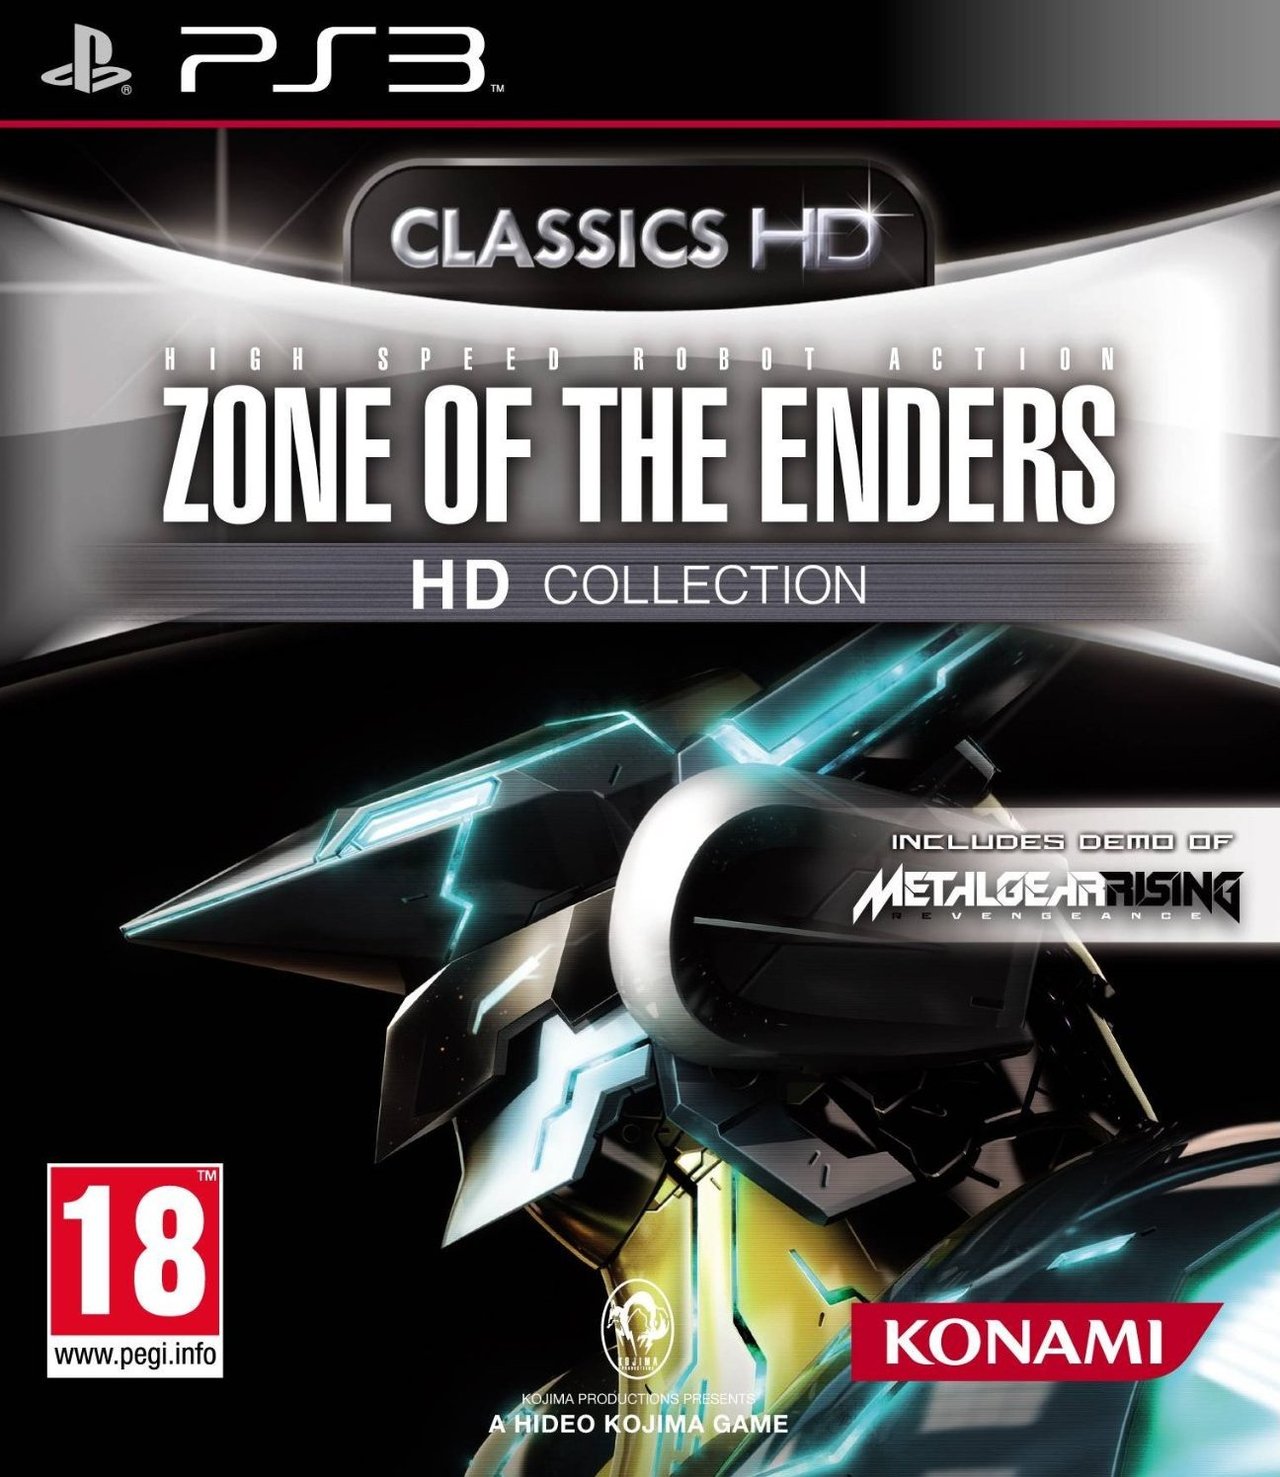 Zone of the enders